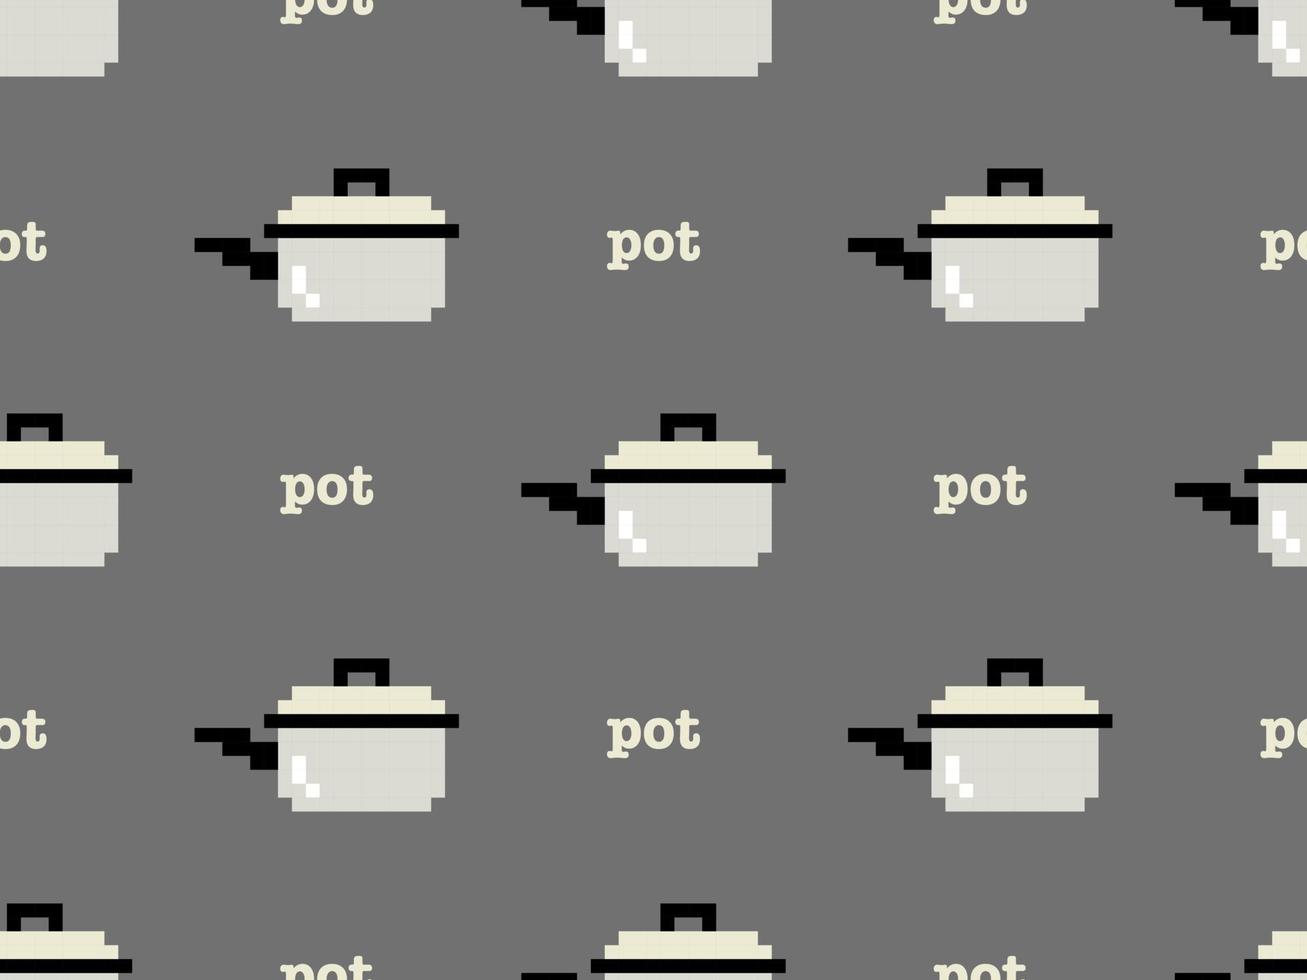 Pot cartoon character seamless pattern on gray background. Pixel style.. vector